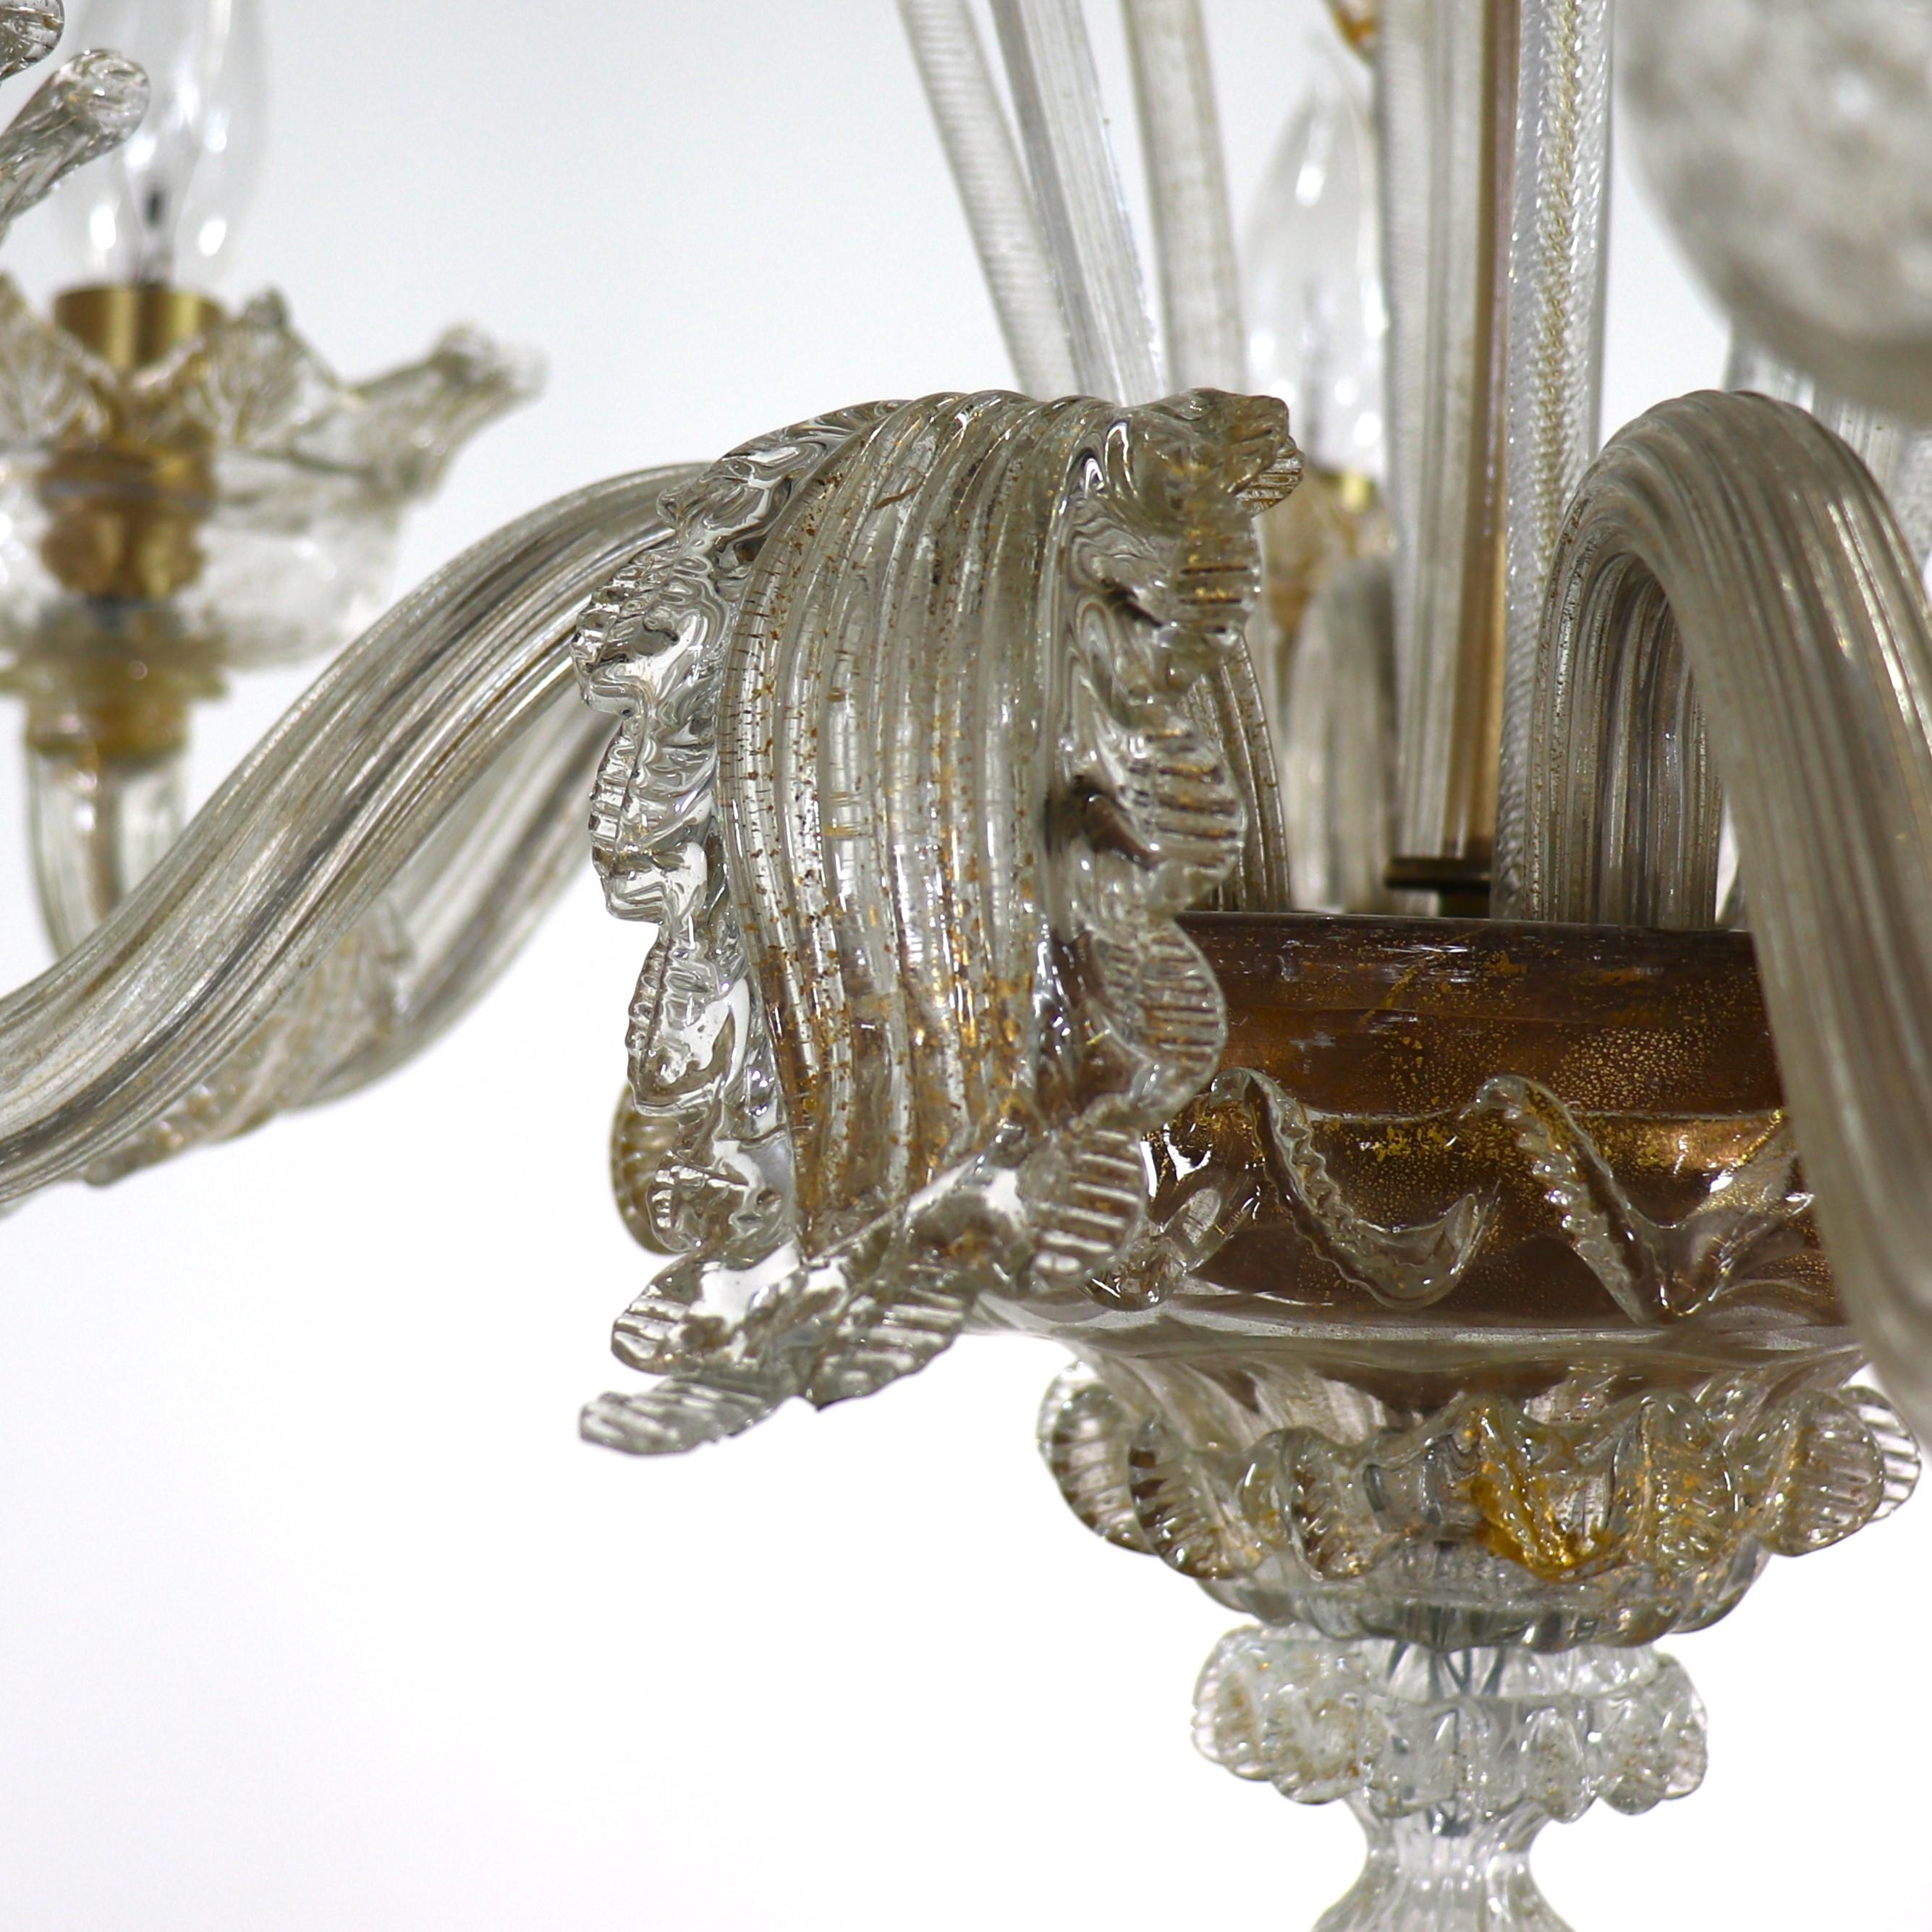  Vintage Baroque Style Gold Infused Cristallo Murano Chandelier For Sale 2